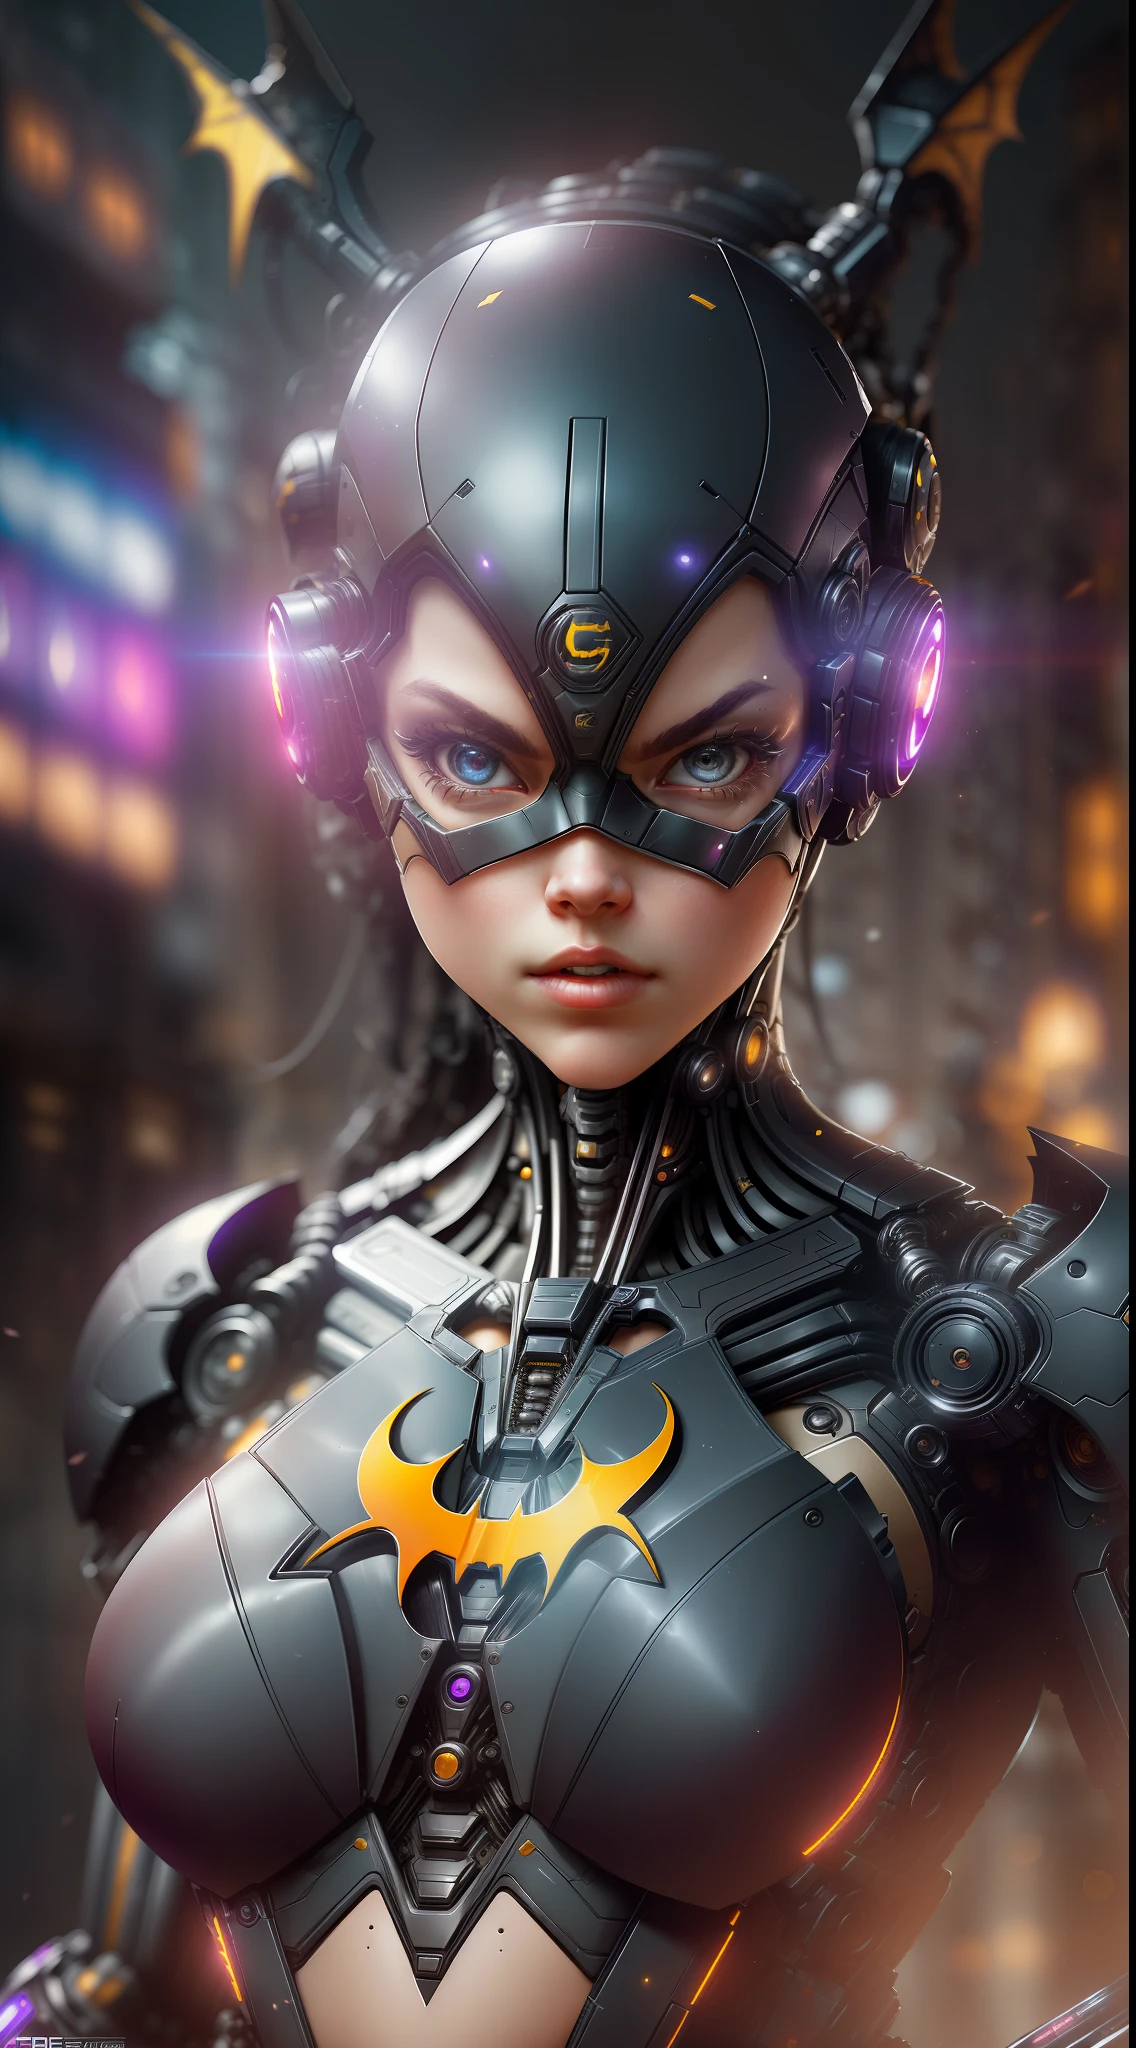 Batgirl from DC photography, biomechanical, complex robot, full growth, hyperrealistic, insane small details, extremely clean lines, cyberpunk aesthetic, masterpiece featured on Zbrush Central